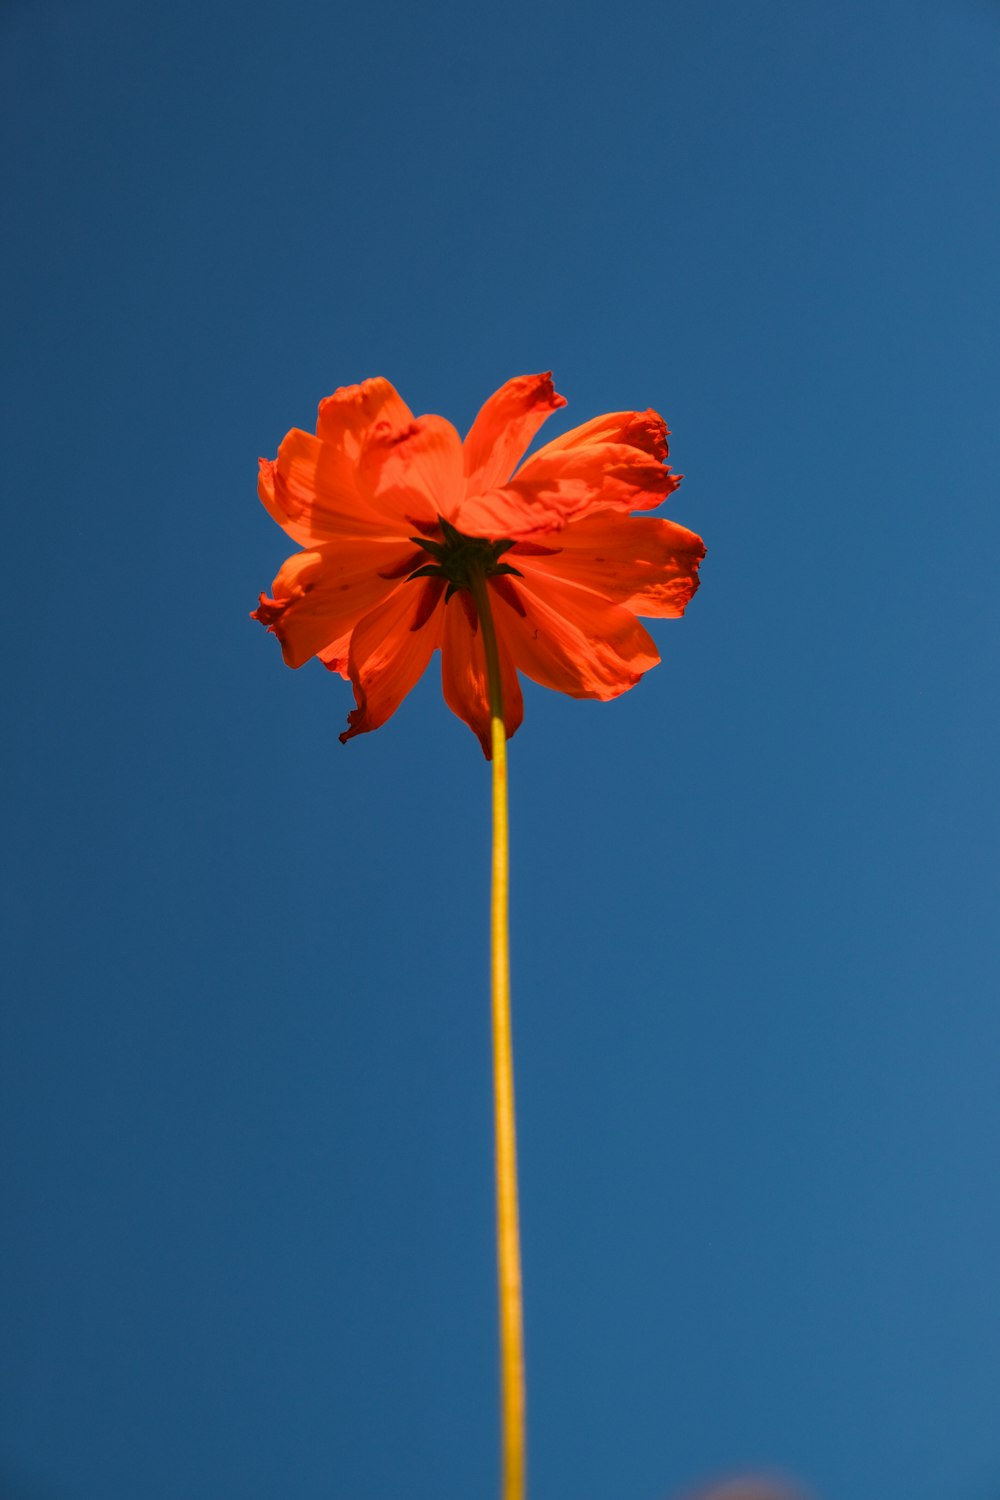 a single orange flower with a blue sky in the background